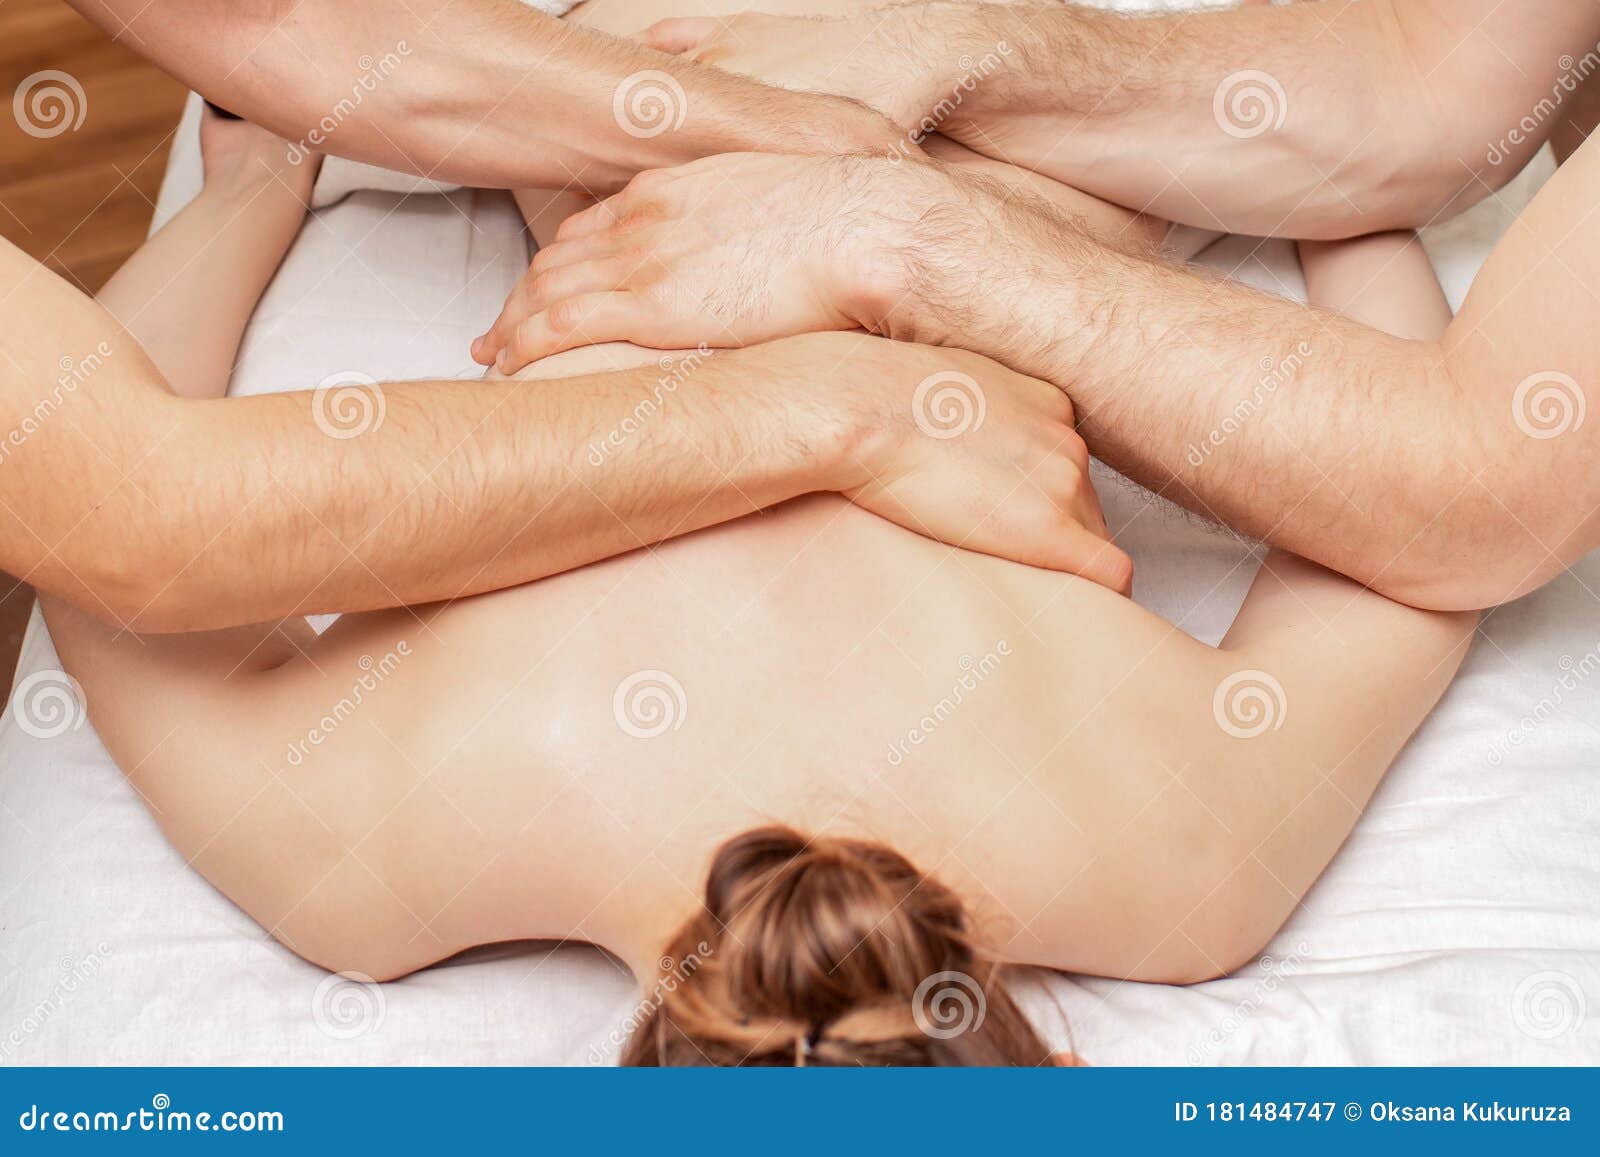 Woman Receiving Massage in Four Hands Stock Image pic photo